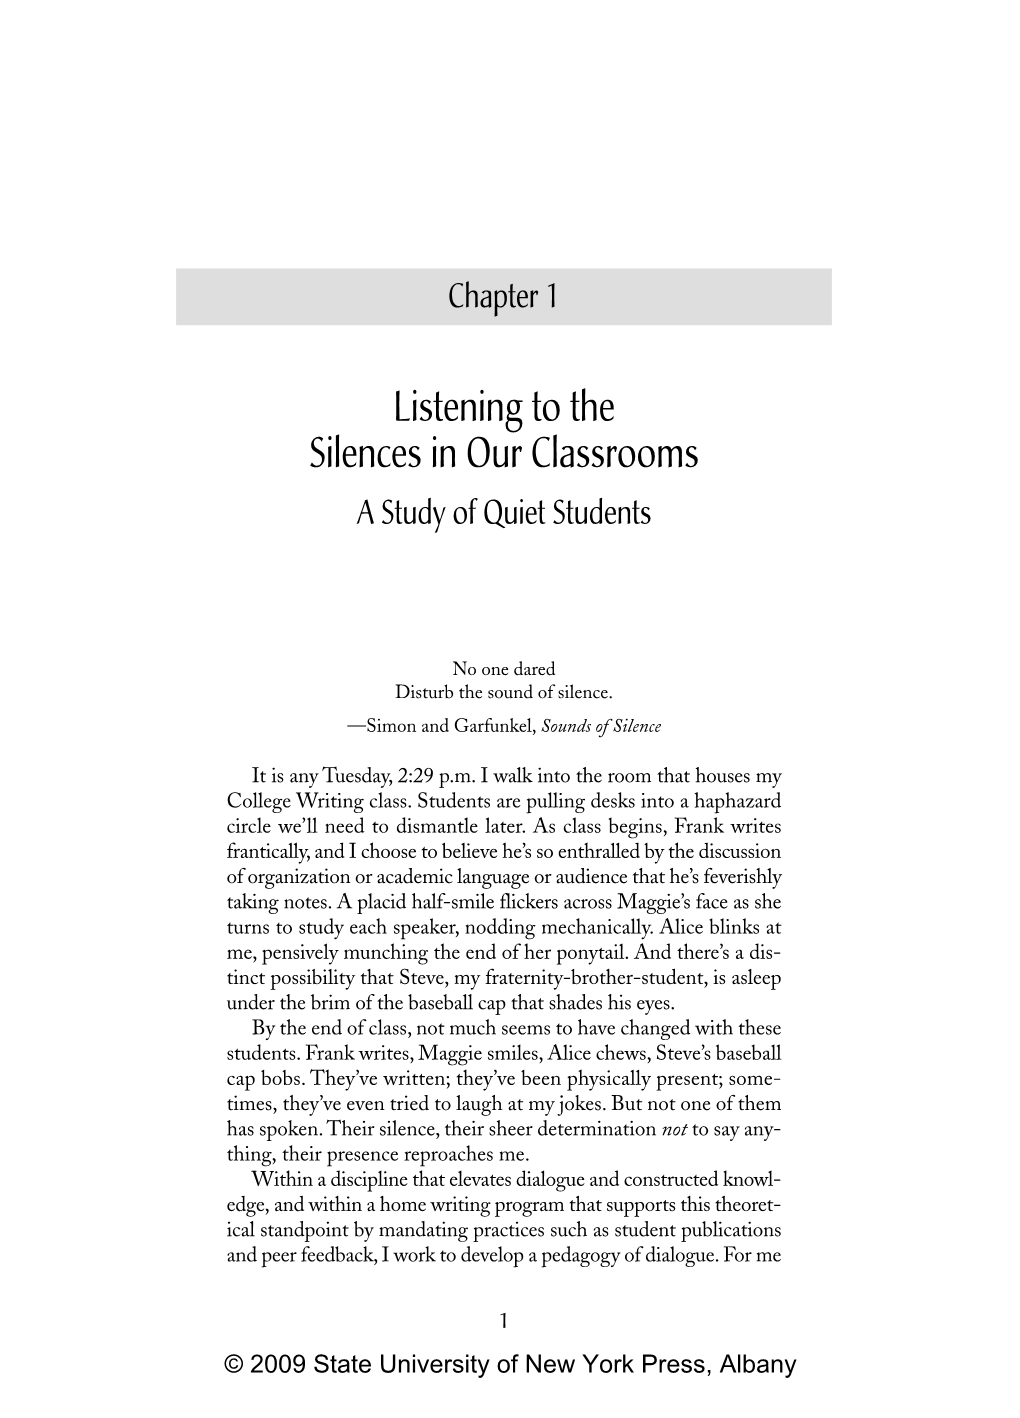 Listening to the Silences in Our Classrooms a Study of Quiet Students